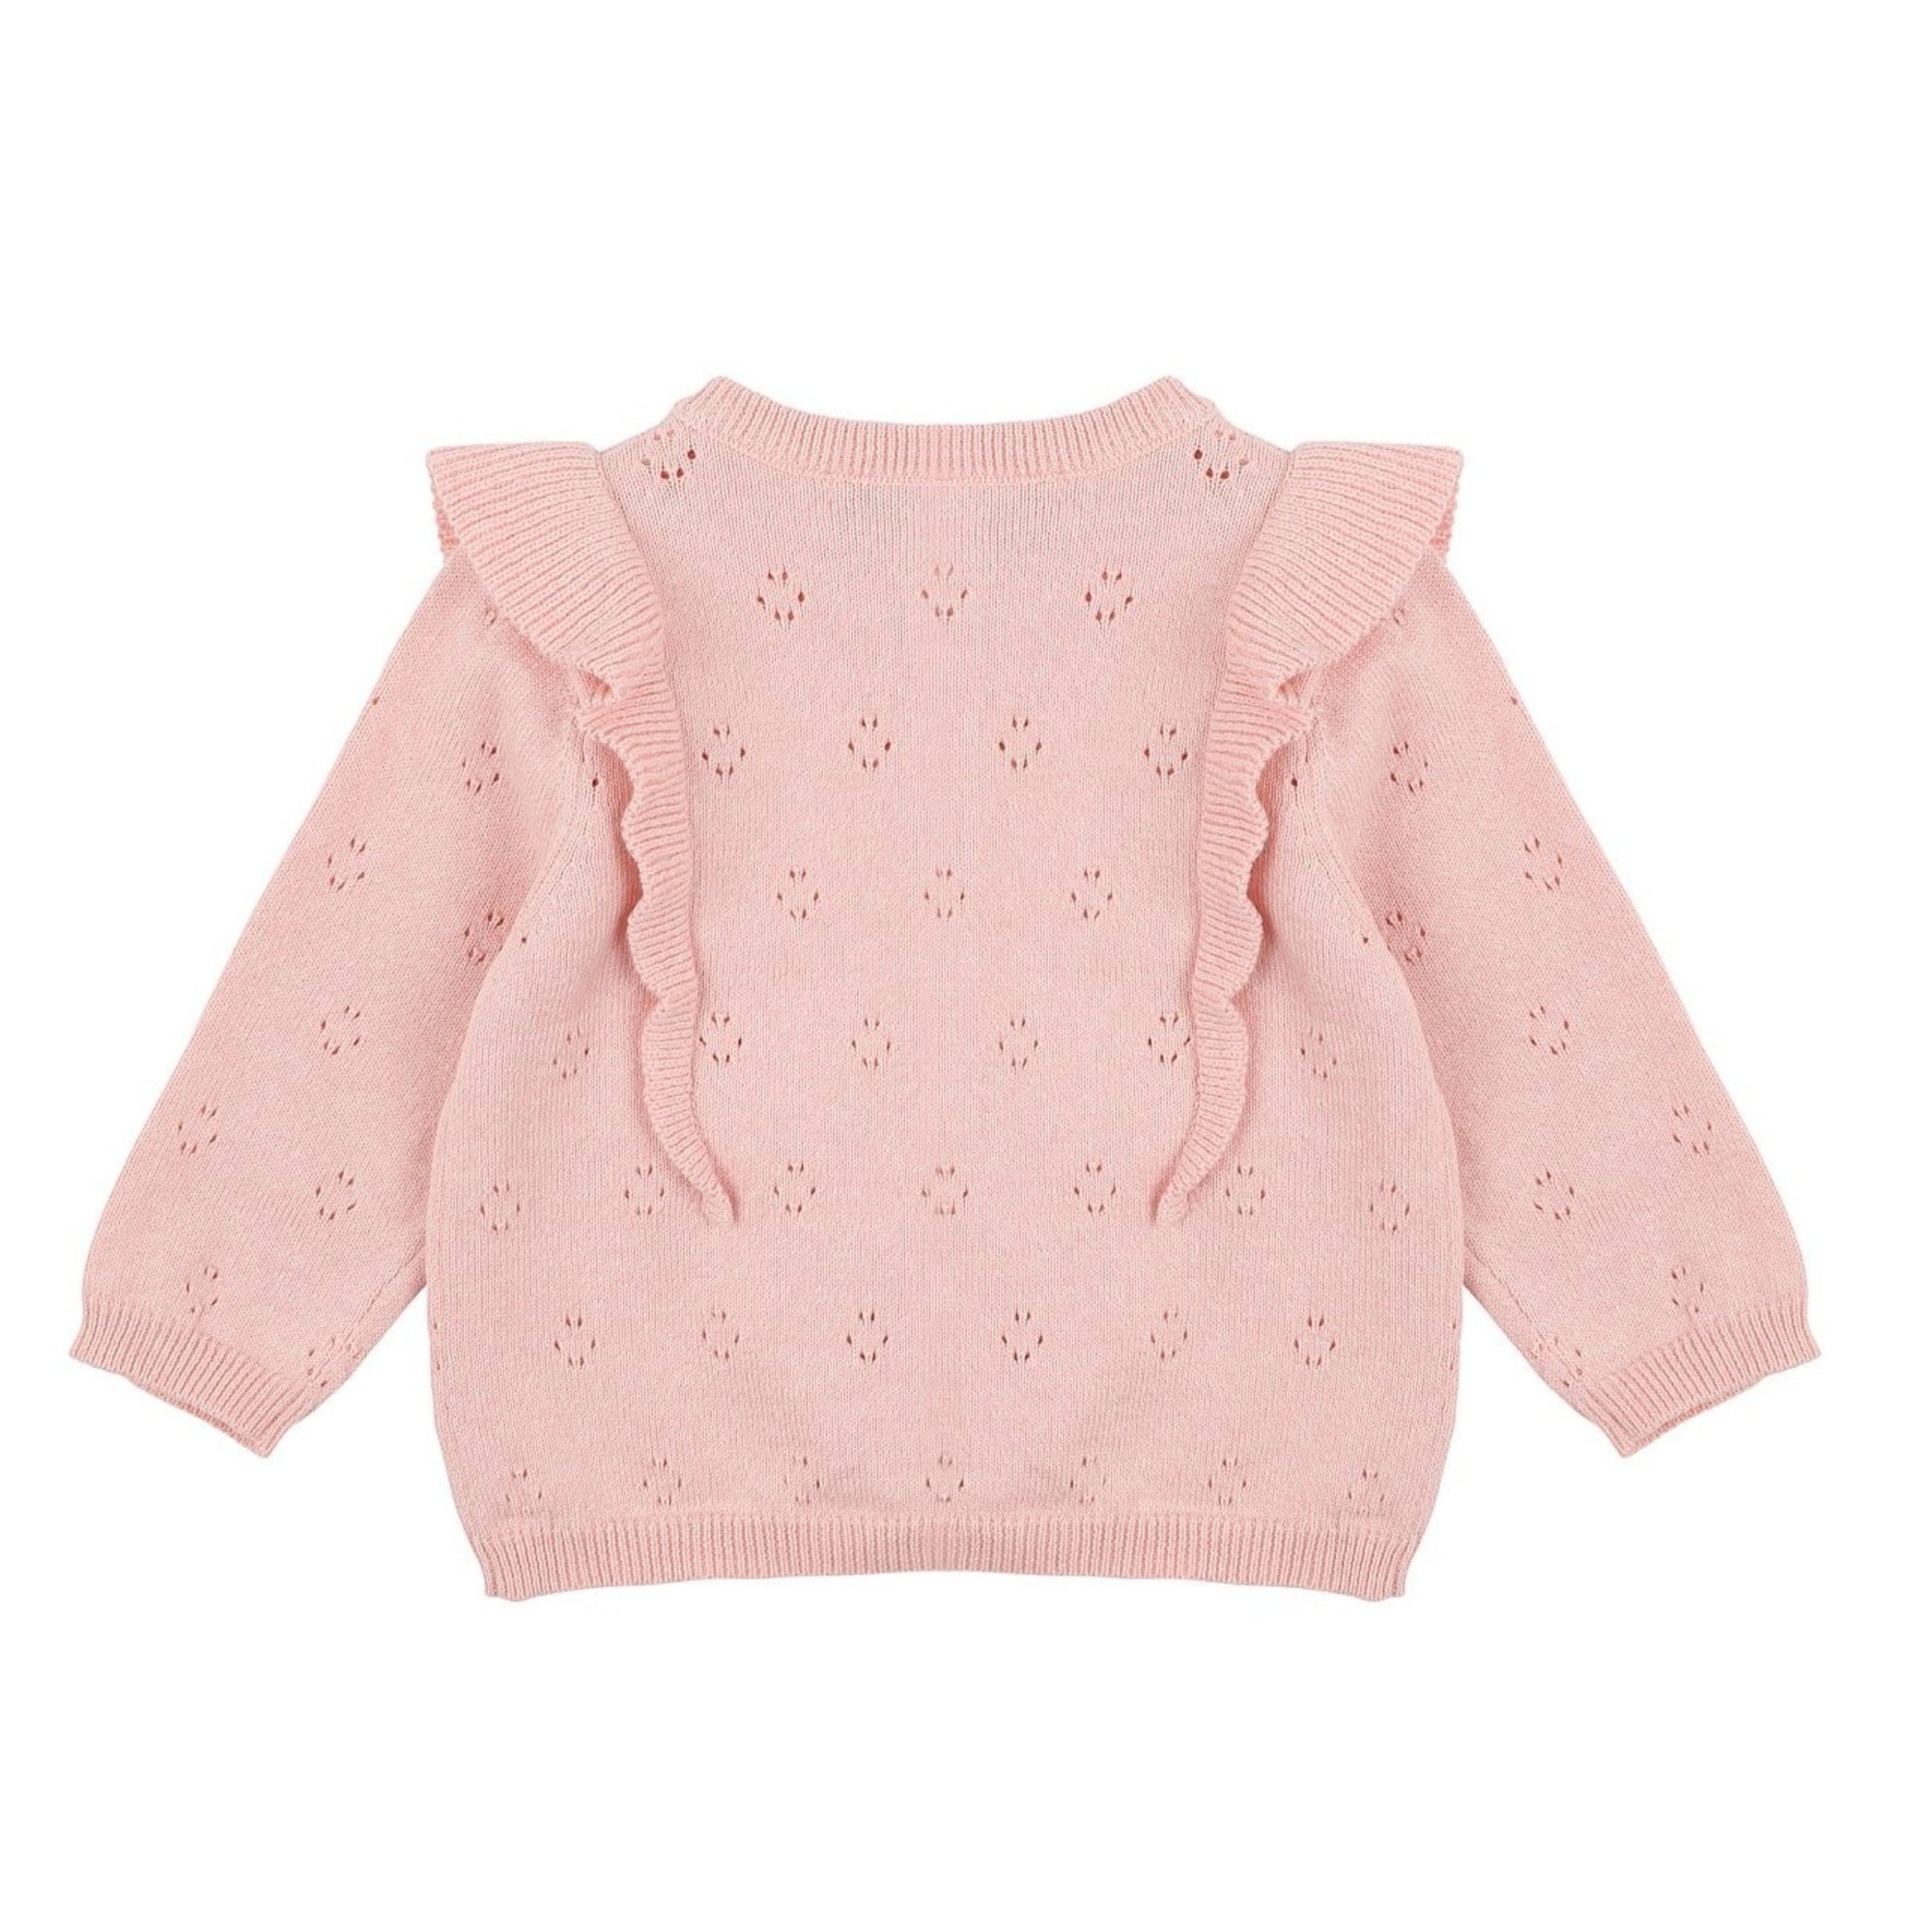 Fox & Finch Pink Frill Pointelle Cardigan - Ivory